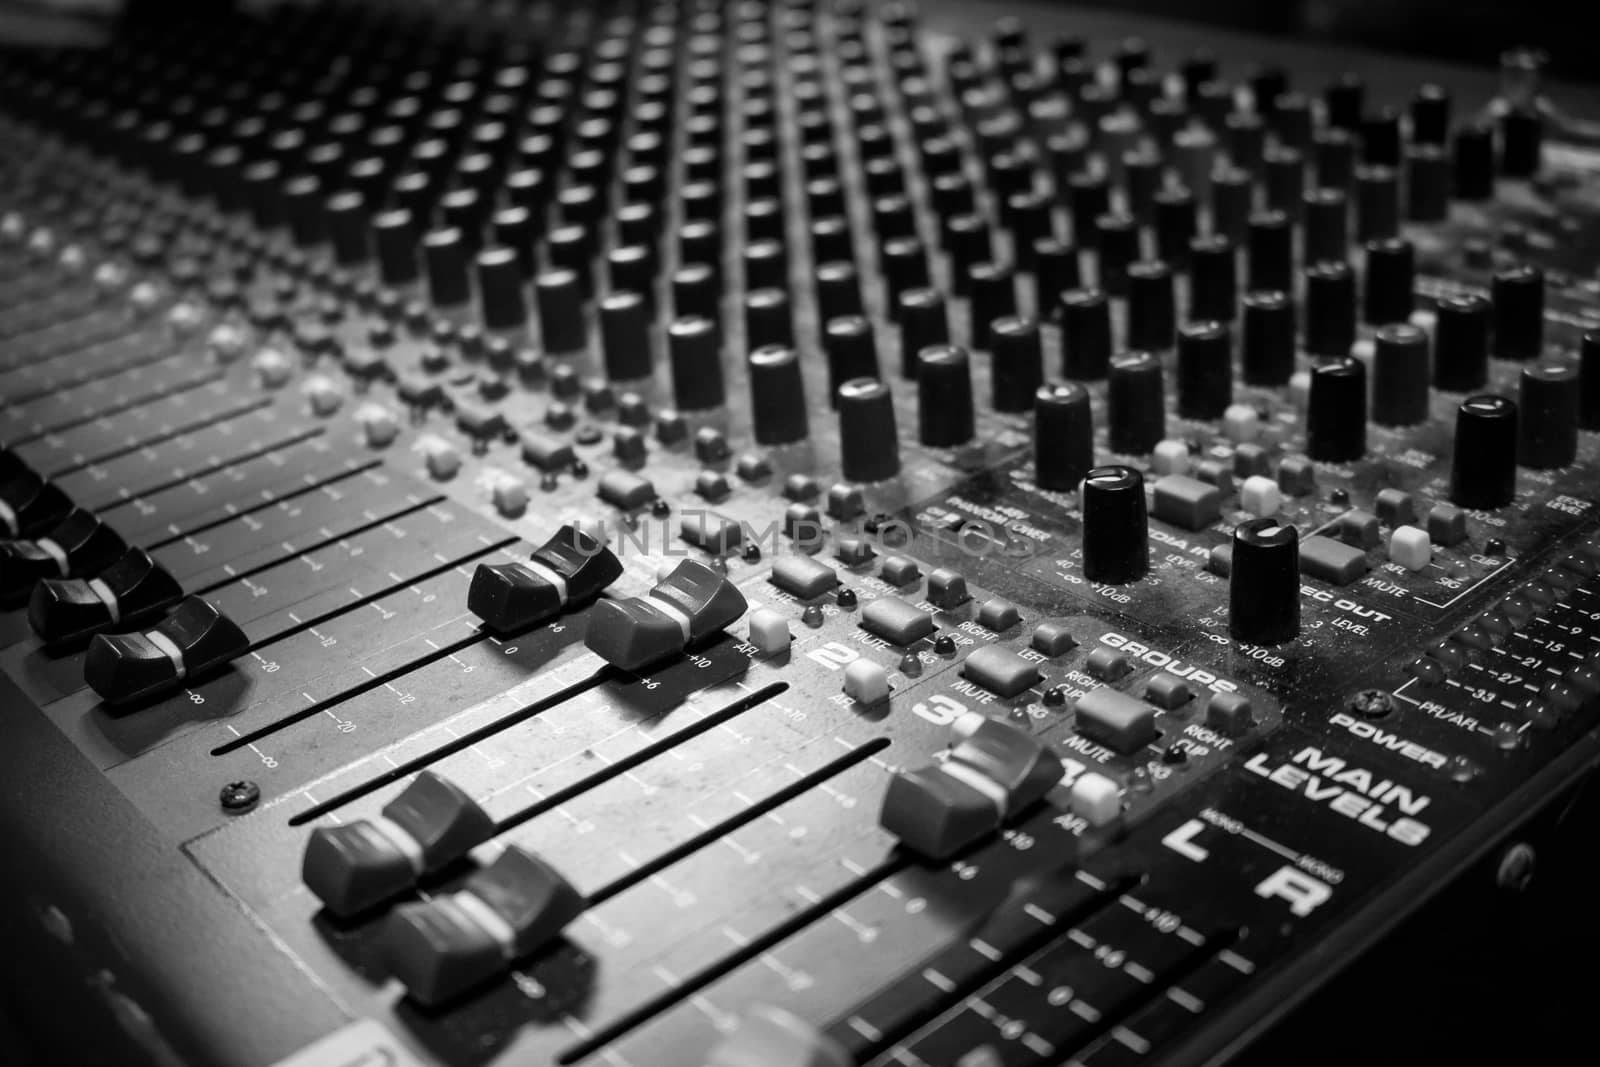 Multi Channel Analog Sound Mixing Console by ernest_davies